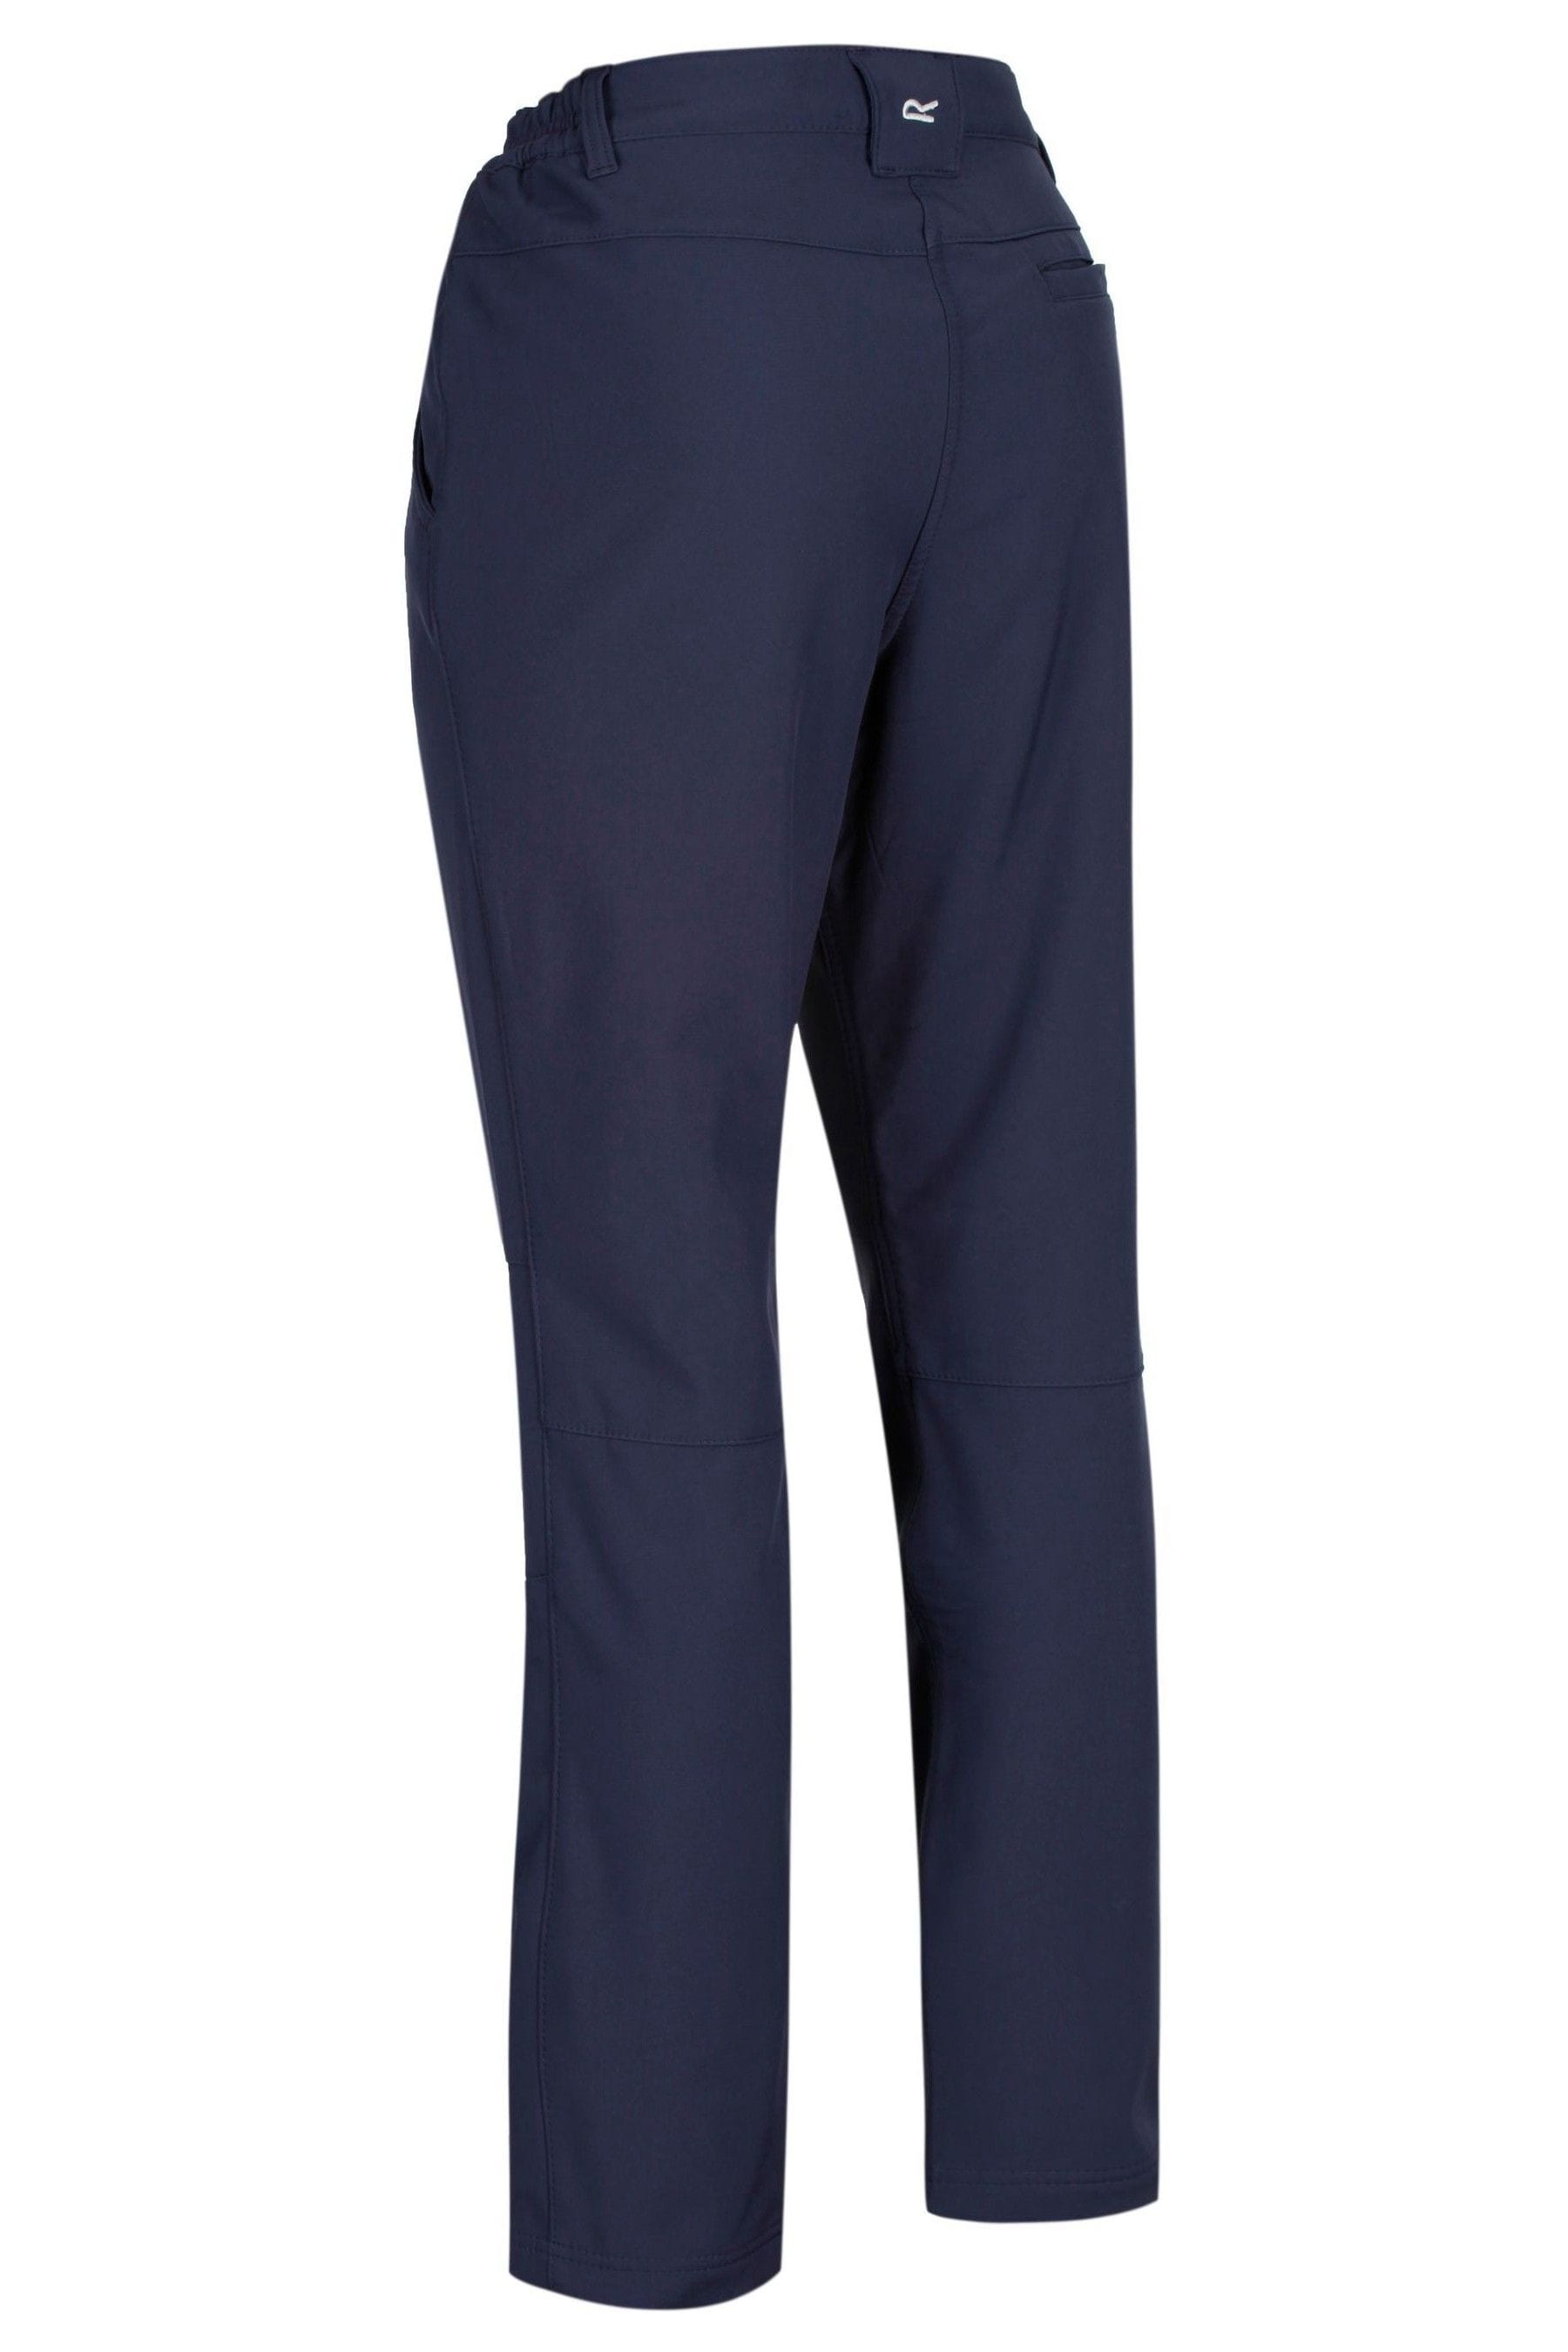 Buy Regatta Womens Fenton Softshell Trousers from the Next UK online shop